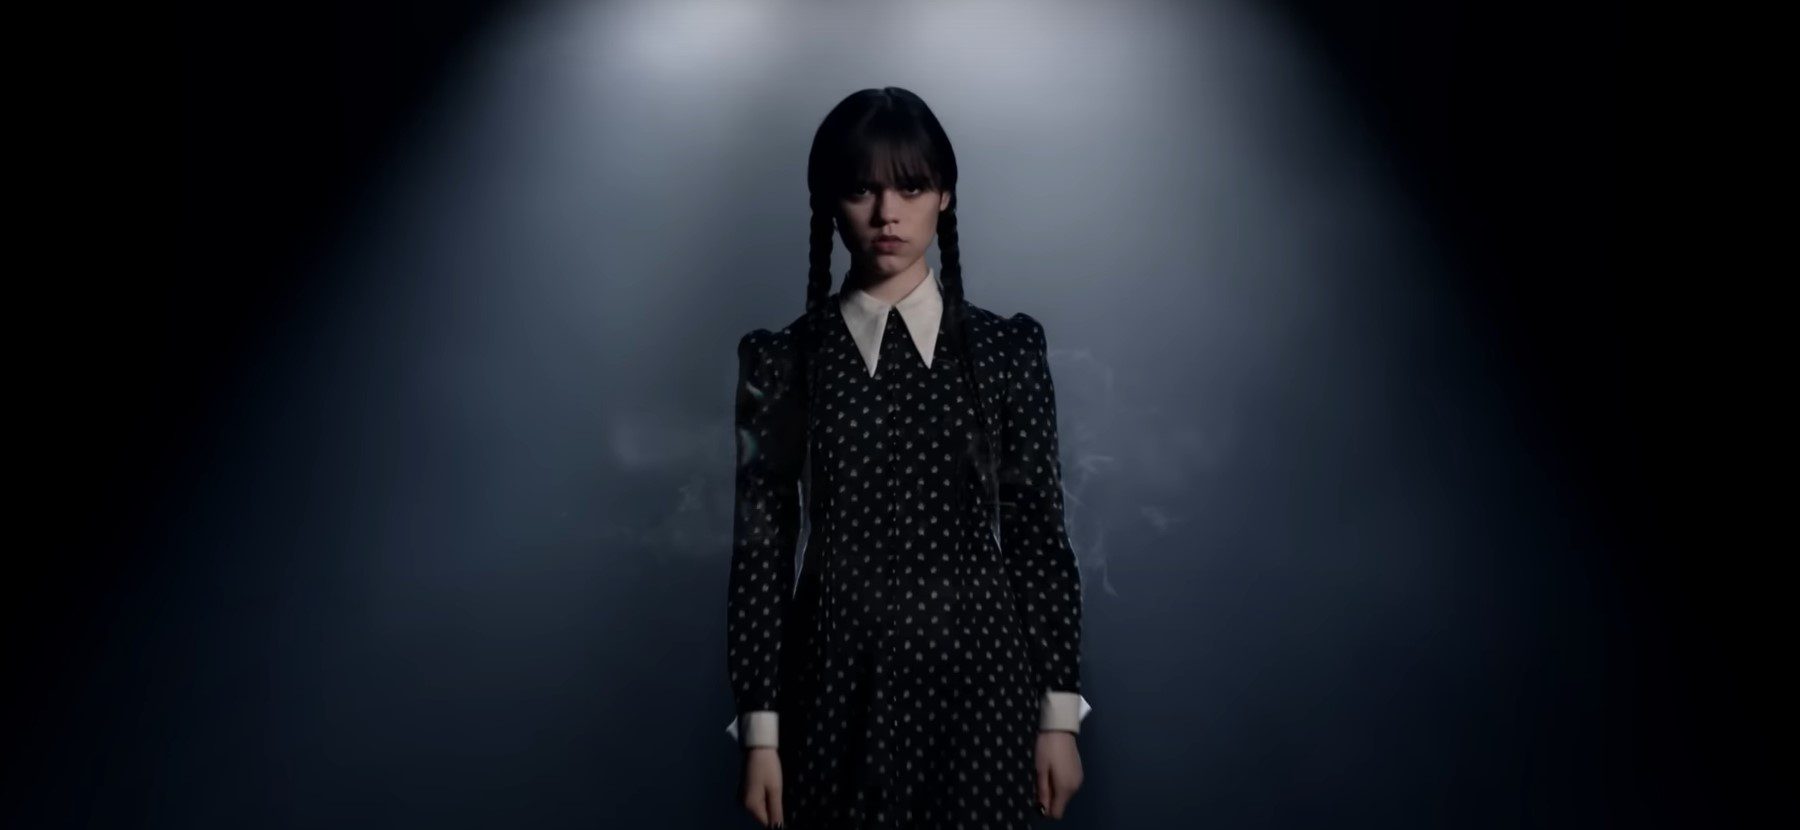 Wednesday Trailer Out Now: The Addams Family Girl Comes To Netflix ...